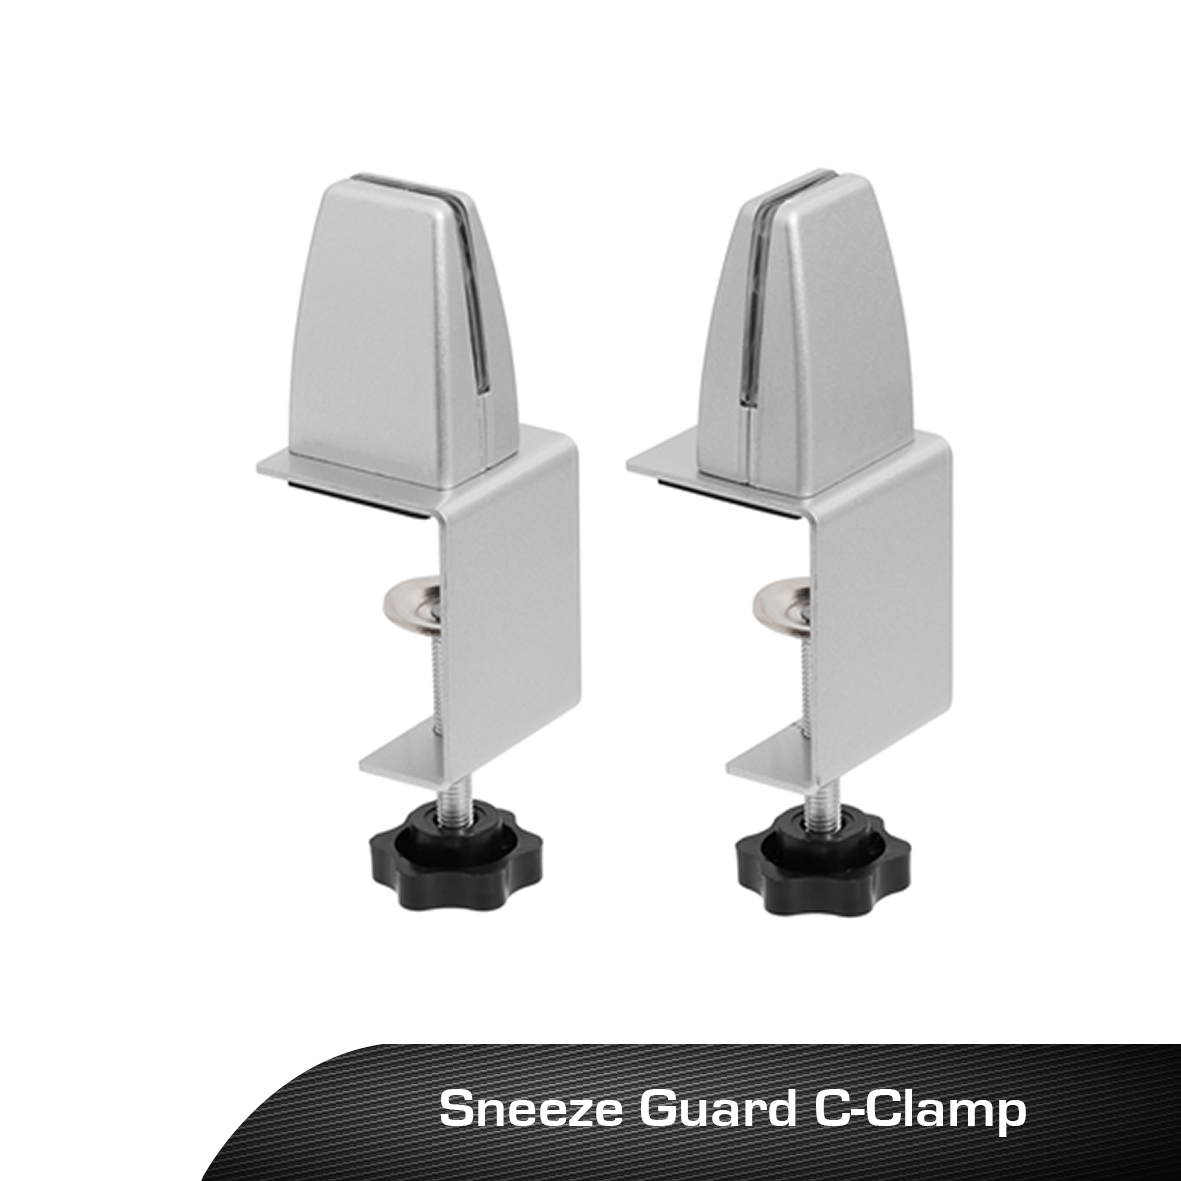 up to 2 Countertop 15289-2D FixtureDisplays Sneeze Guard C-Clamp Support Edge Clamp Dual Direction Adjustable Work with 1/8-3/4 Material 